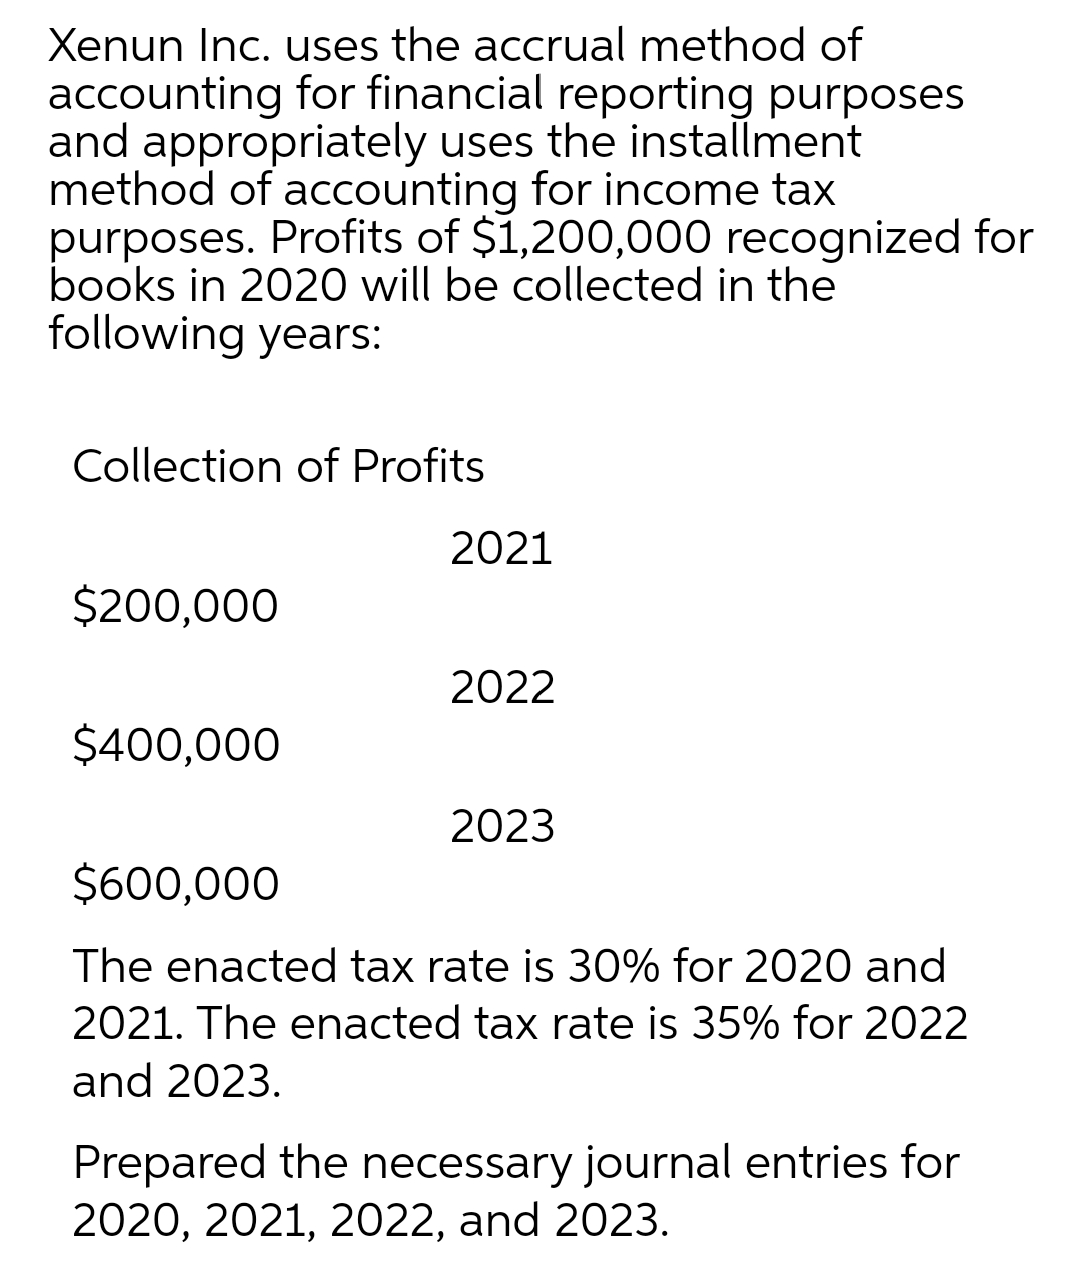 Xenun Inc. uses the accrual method of
accounting for financial reporting purposes
and appropriately uses the installment
method of accounting for income tax
purposes. Profits of $1,200,000 recognized for
books in 2020 will be collected in the
following years:
Collection of Profits
$200,000
$400,000
2021
2022
2023
$600,000
The enacted tax rate is 30% for 2020 and
2021. The enacted tax rate is 35% for 2022
and 2023.
Prepared the necessary journal entries for
2020, 2021, 2022, and 2023.